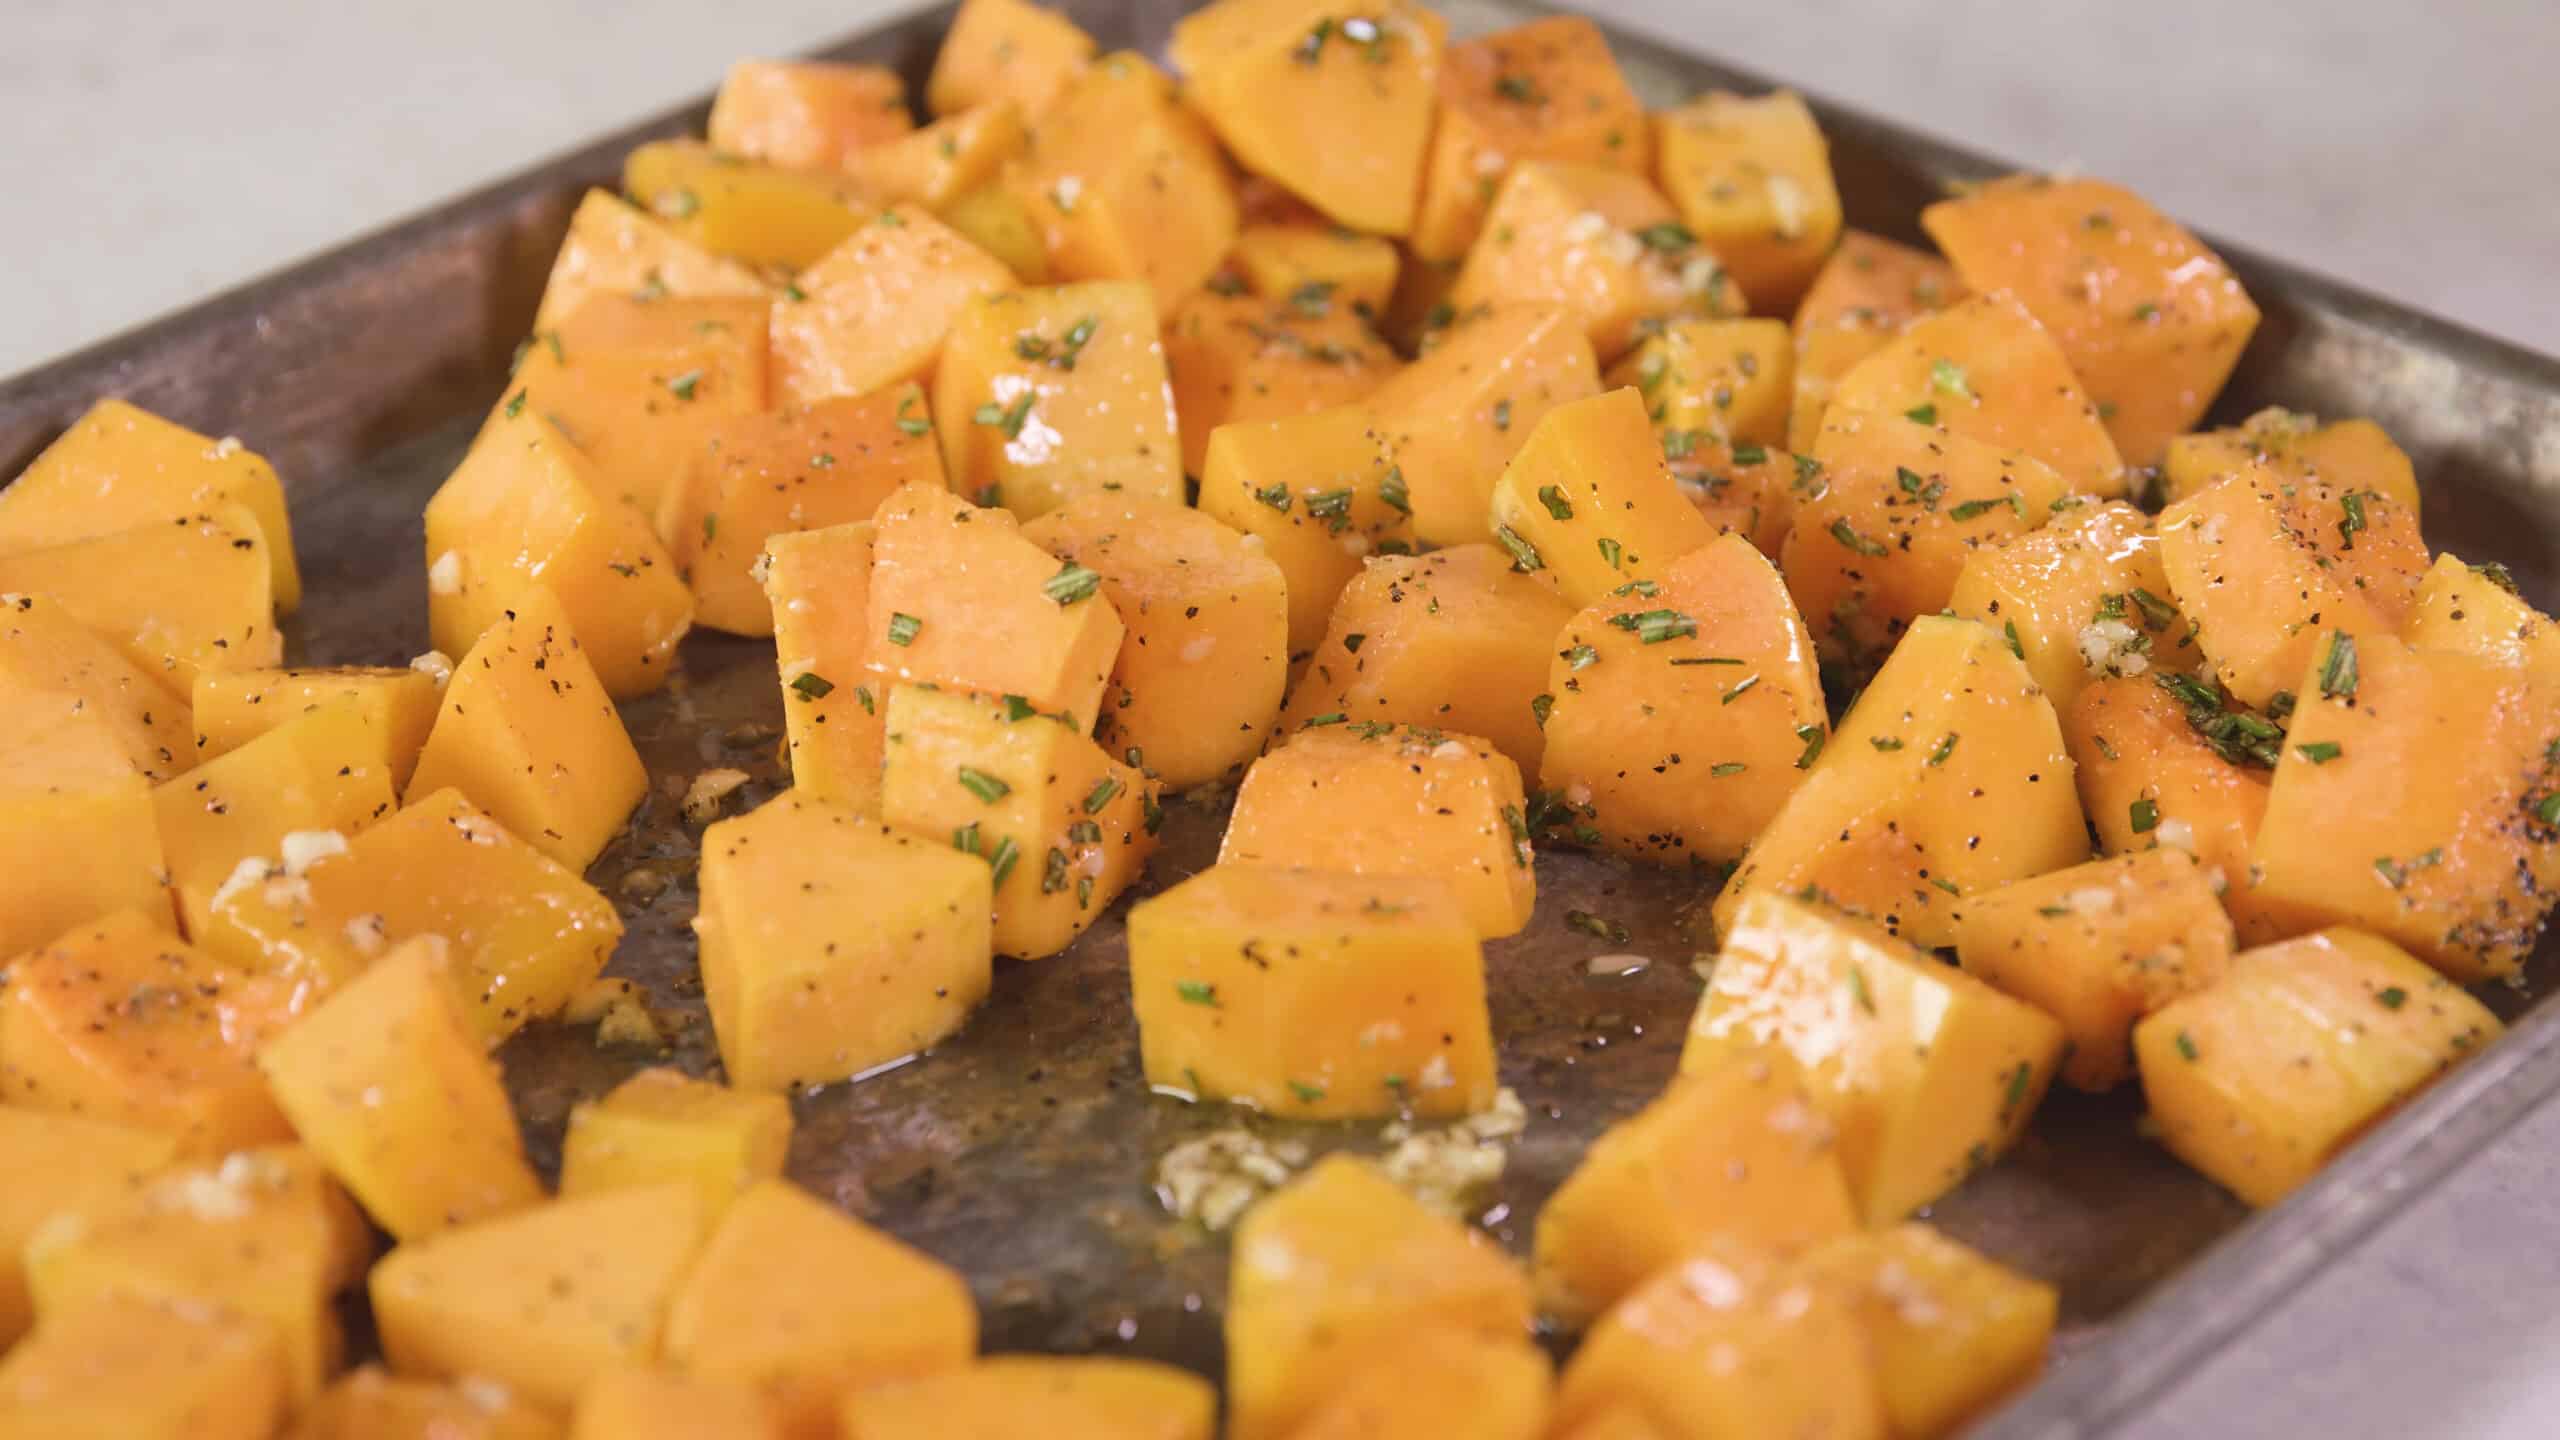 Close-up view of rosemary, garlic, and olive oil flavored butternut squash laying on a silver baking sheet.